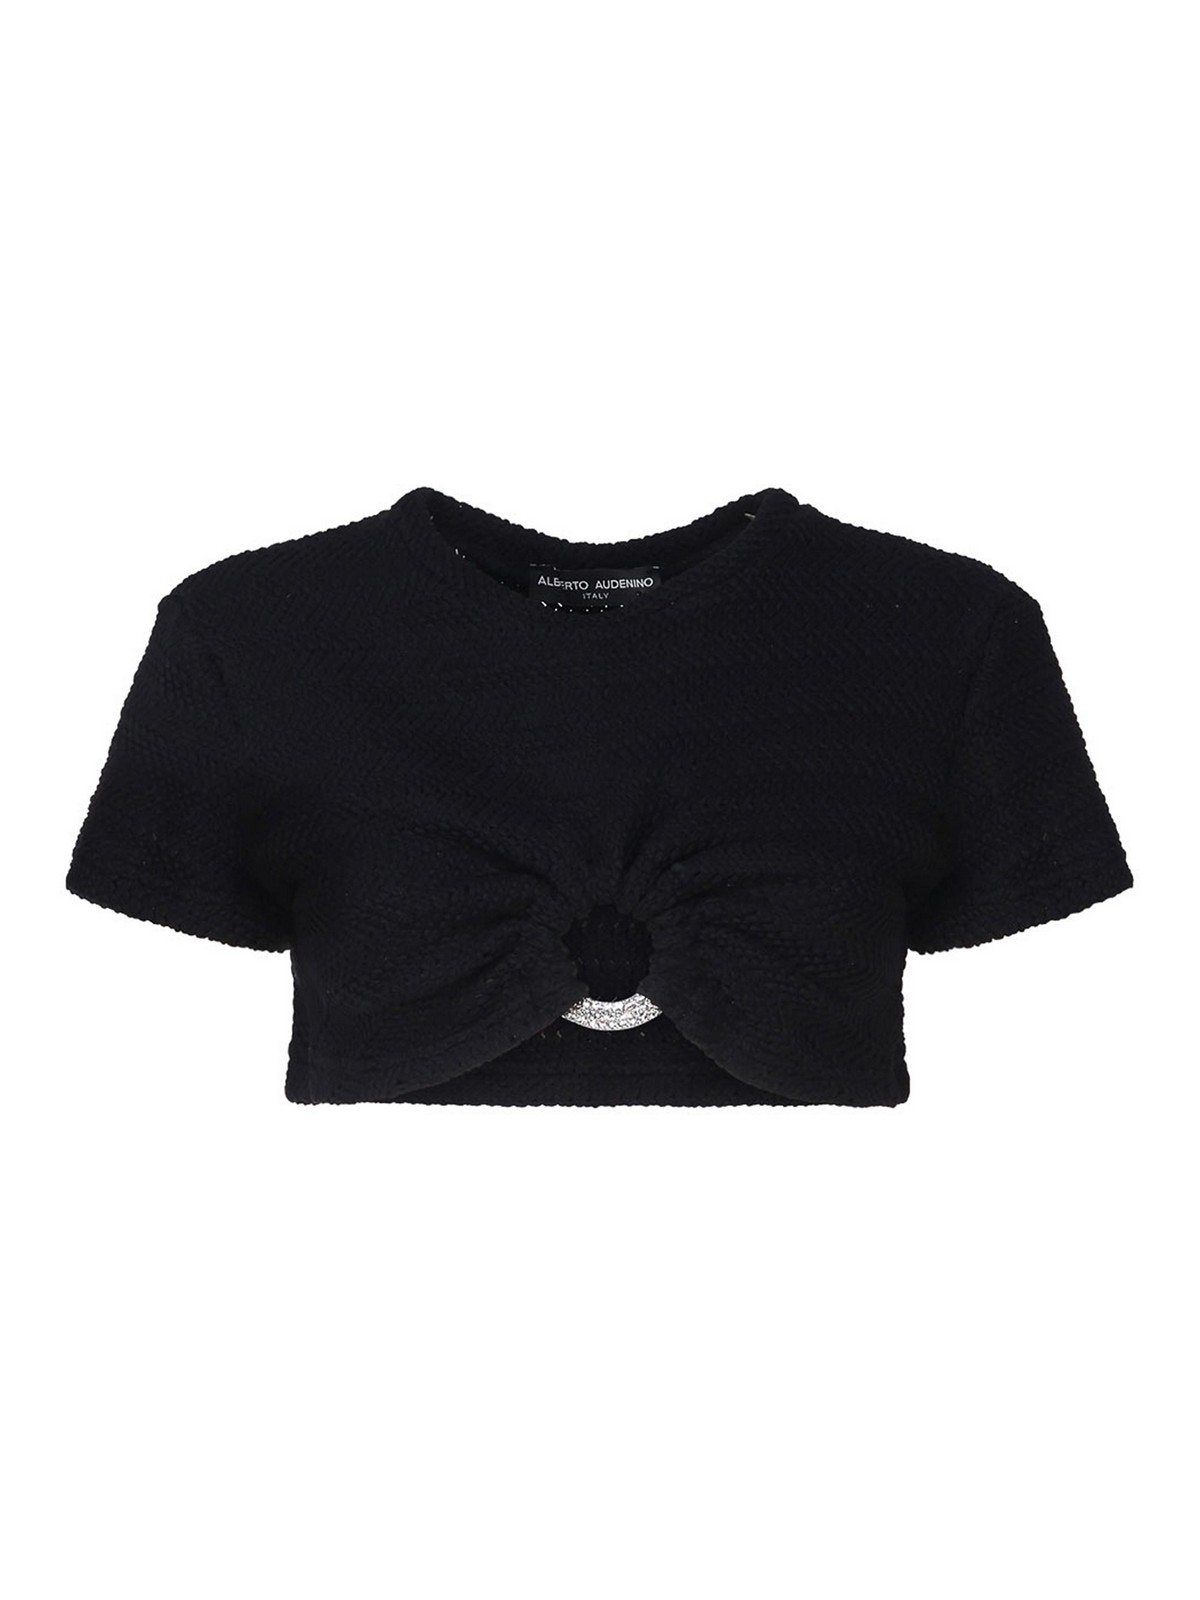 Alberto Audenino Cropped Sweater With Cut- Out Detail In Black